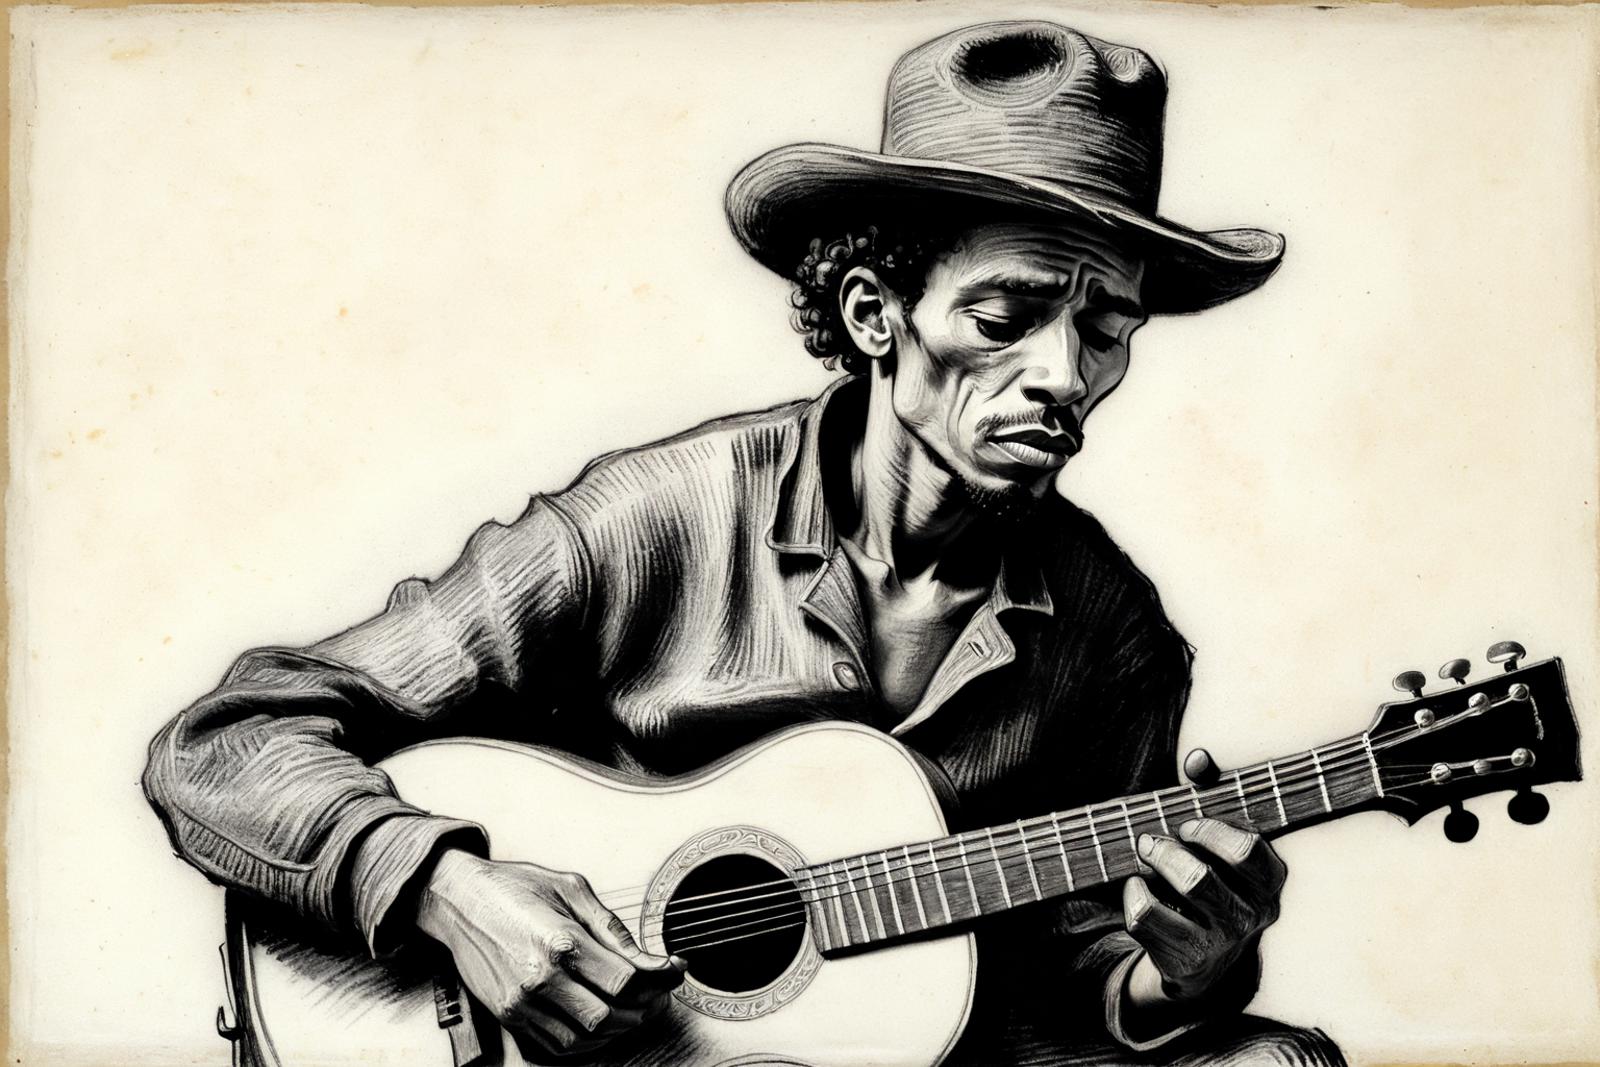 Man Playing Guitar in Black and White Drawing